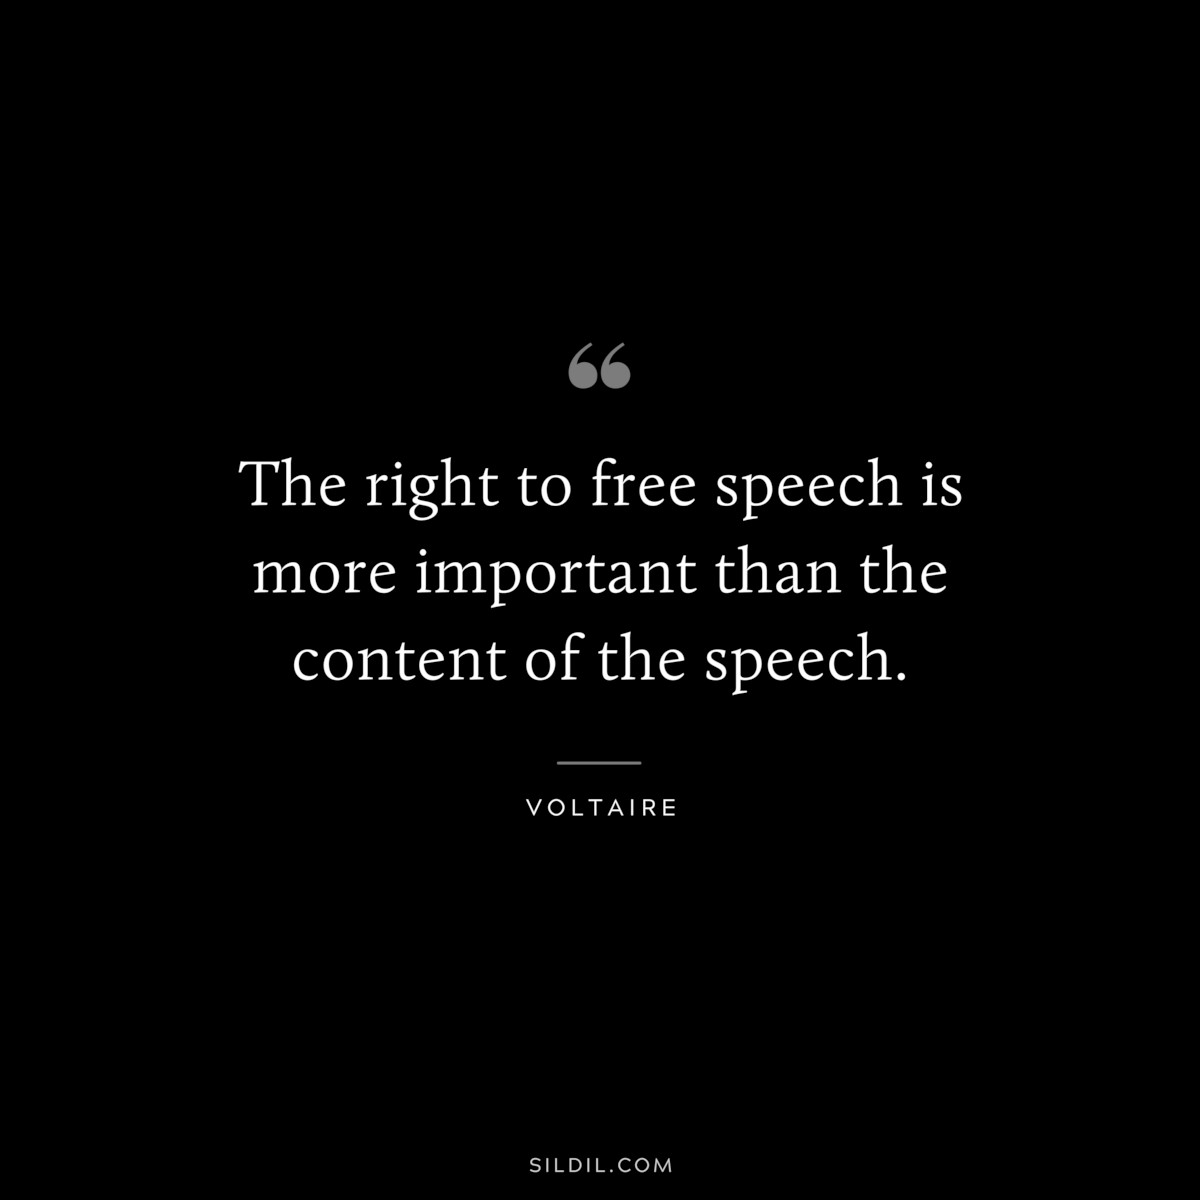 The right to free speech is more important than the content of the speech. ― Voltaire